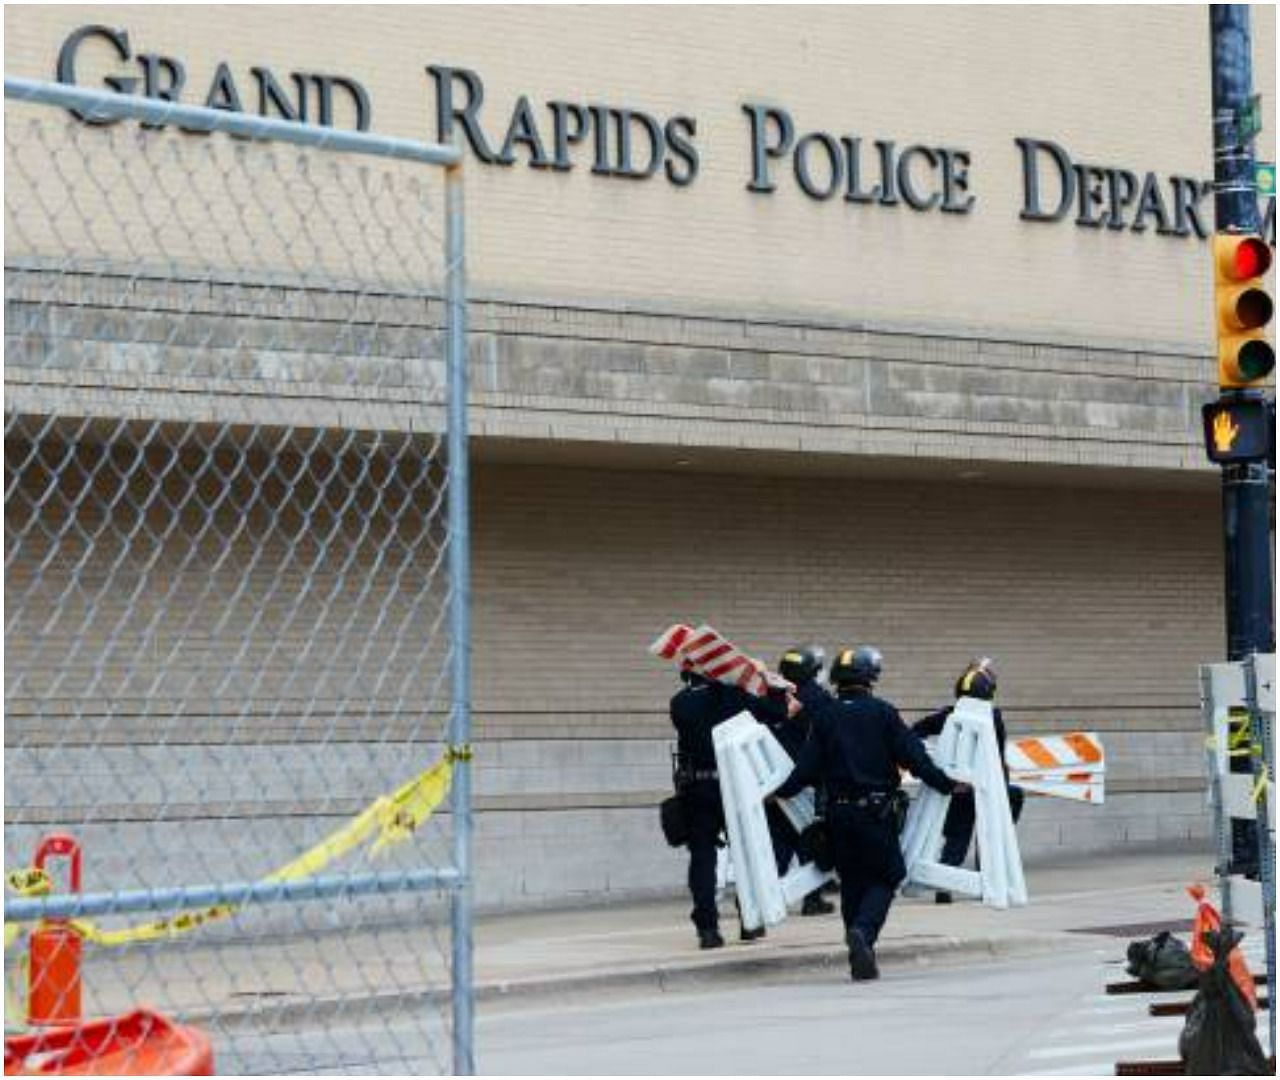 Grand Rapids Police Chief says murder charge a difficult time for the department (Image via Getty Images)